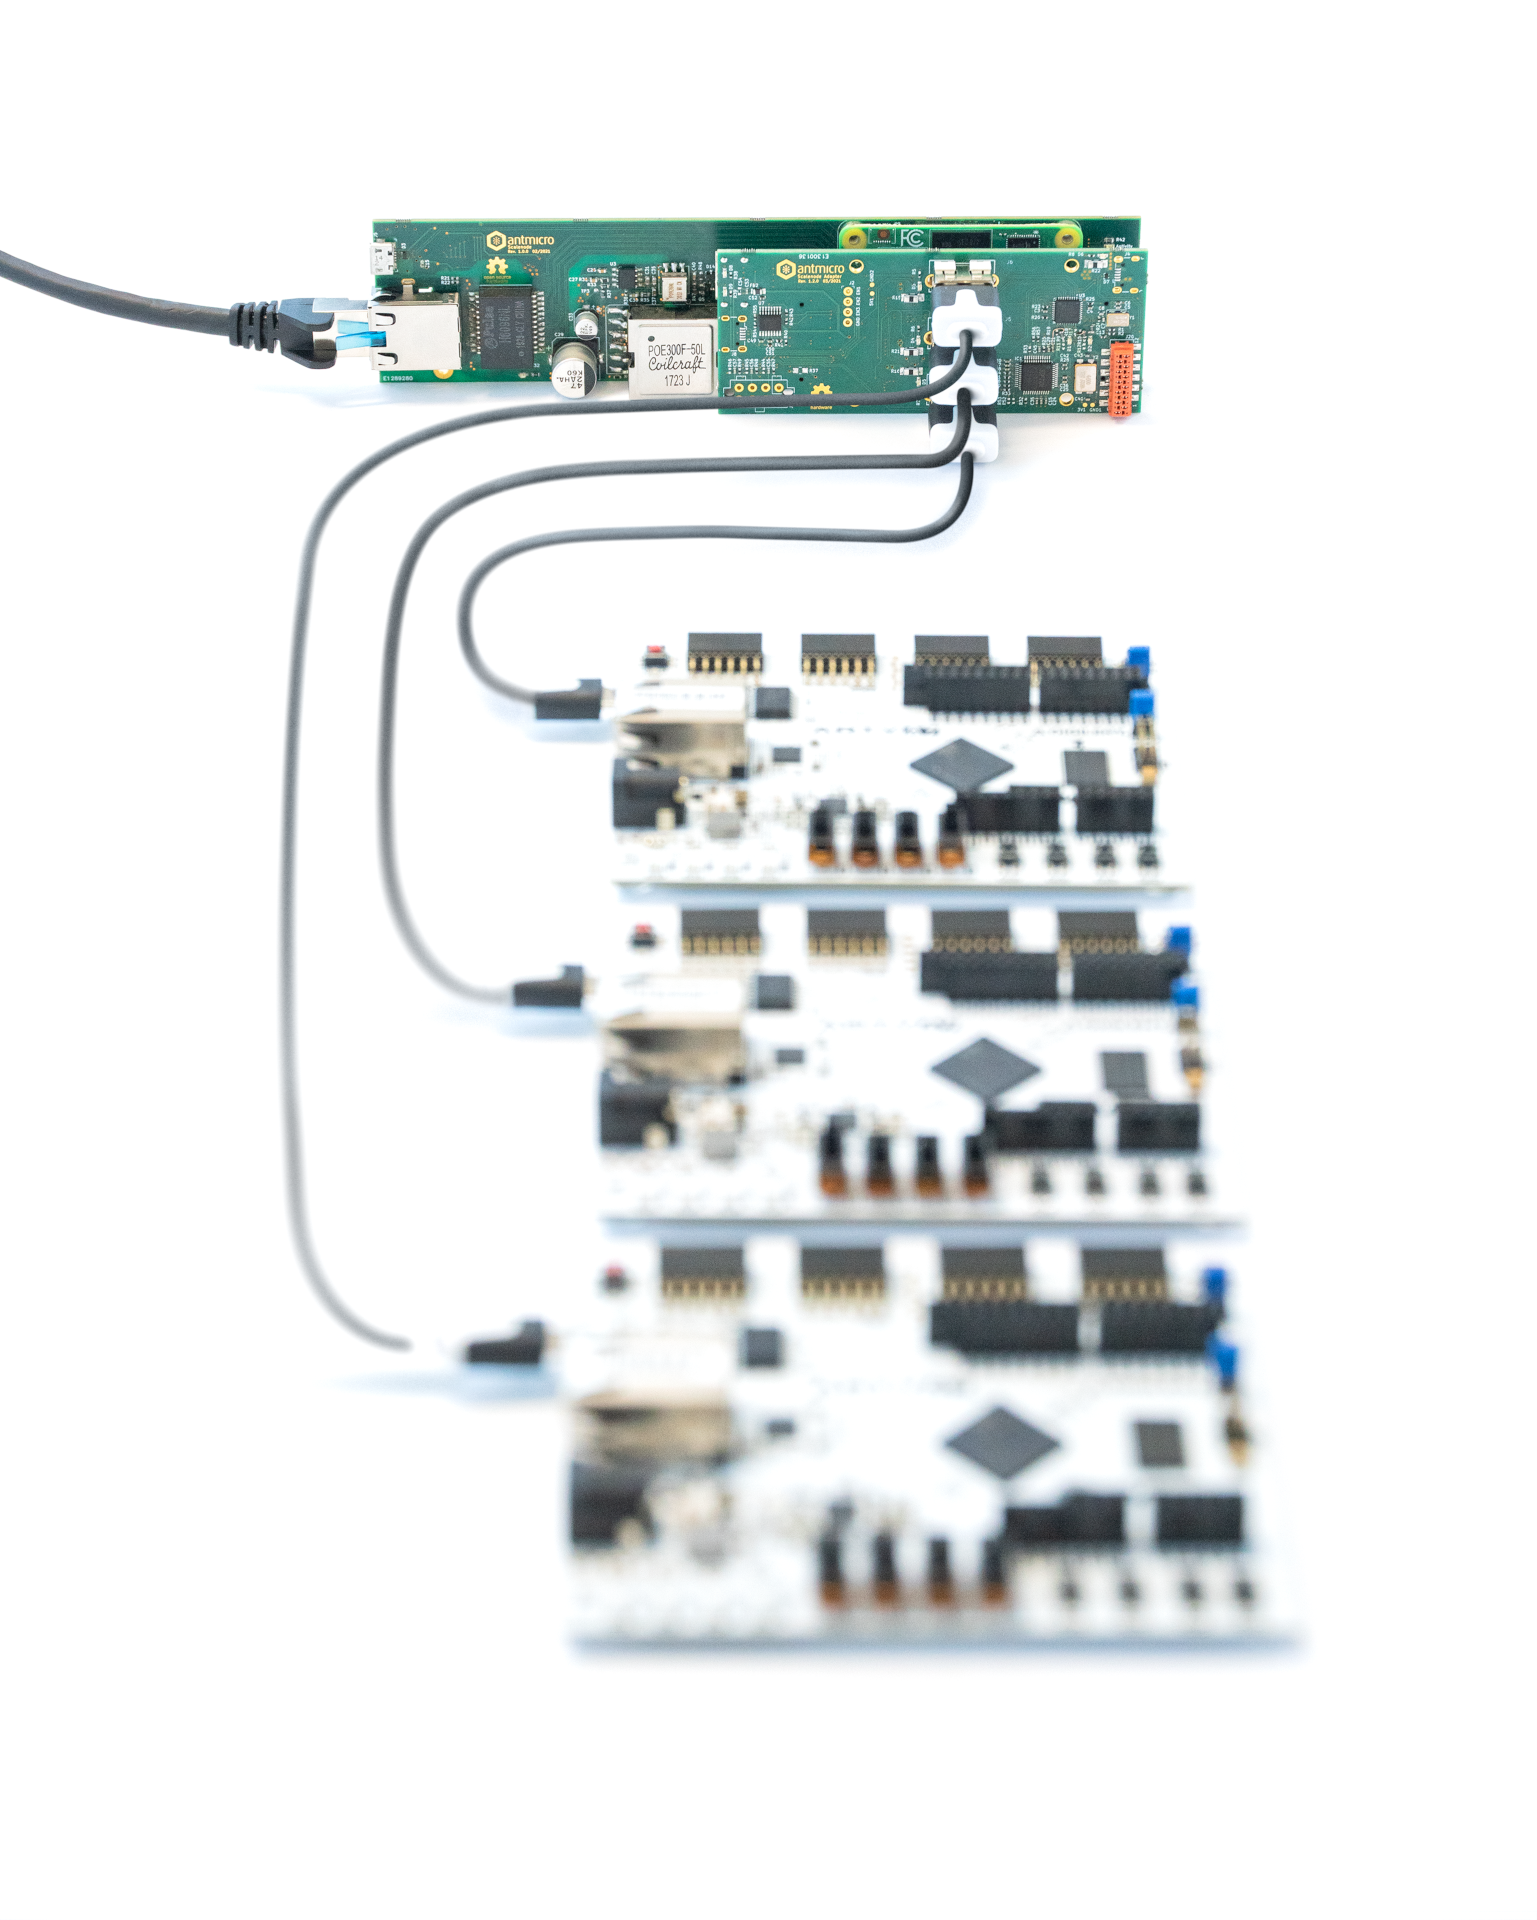 Antmicro Scalenode platform with Artix-7 boards connected